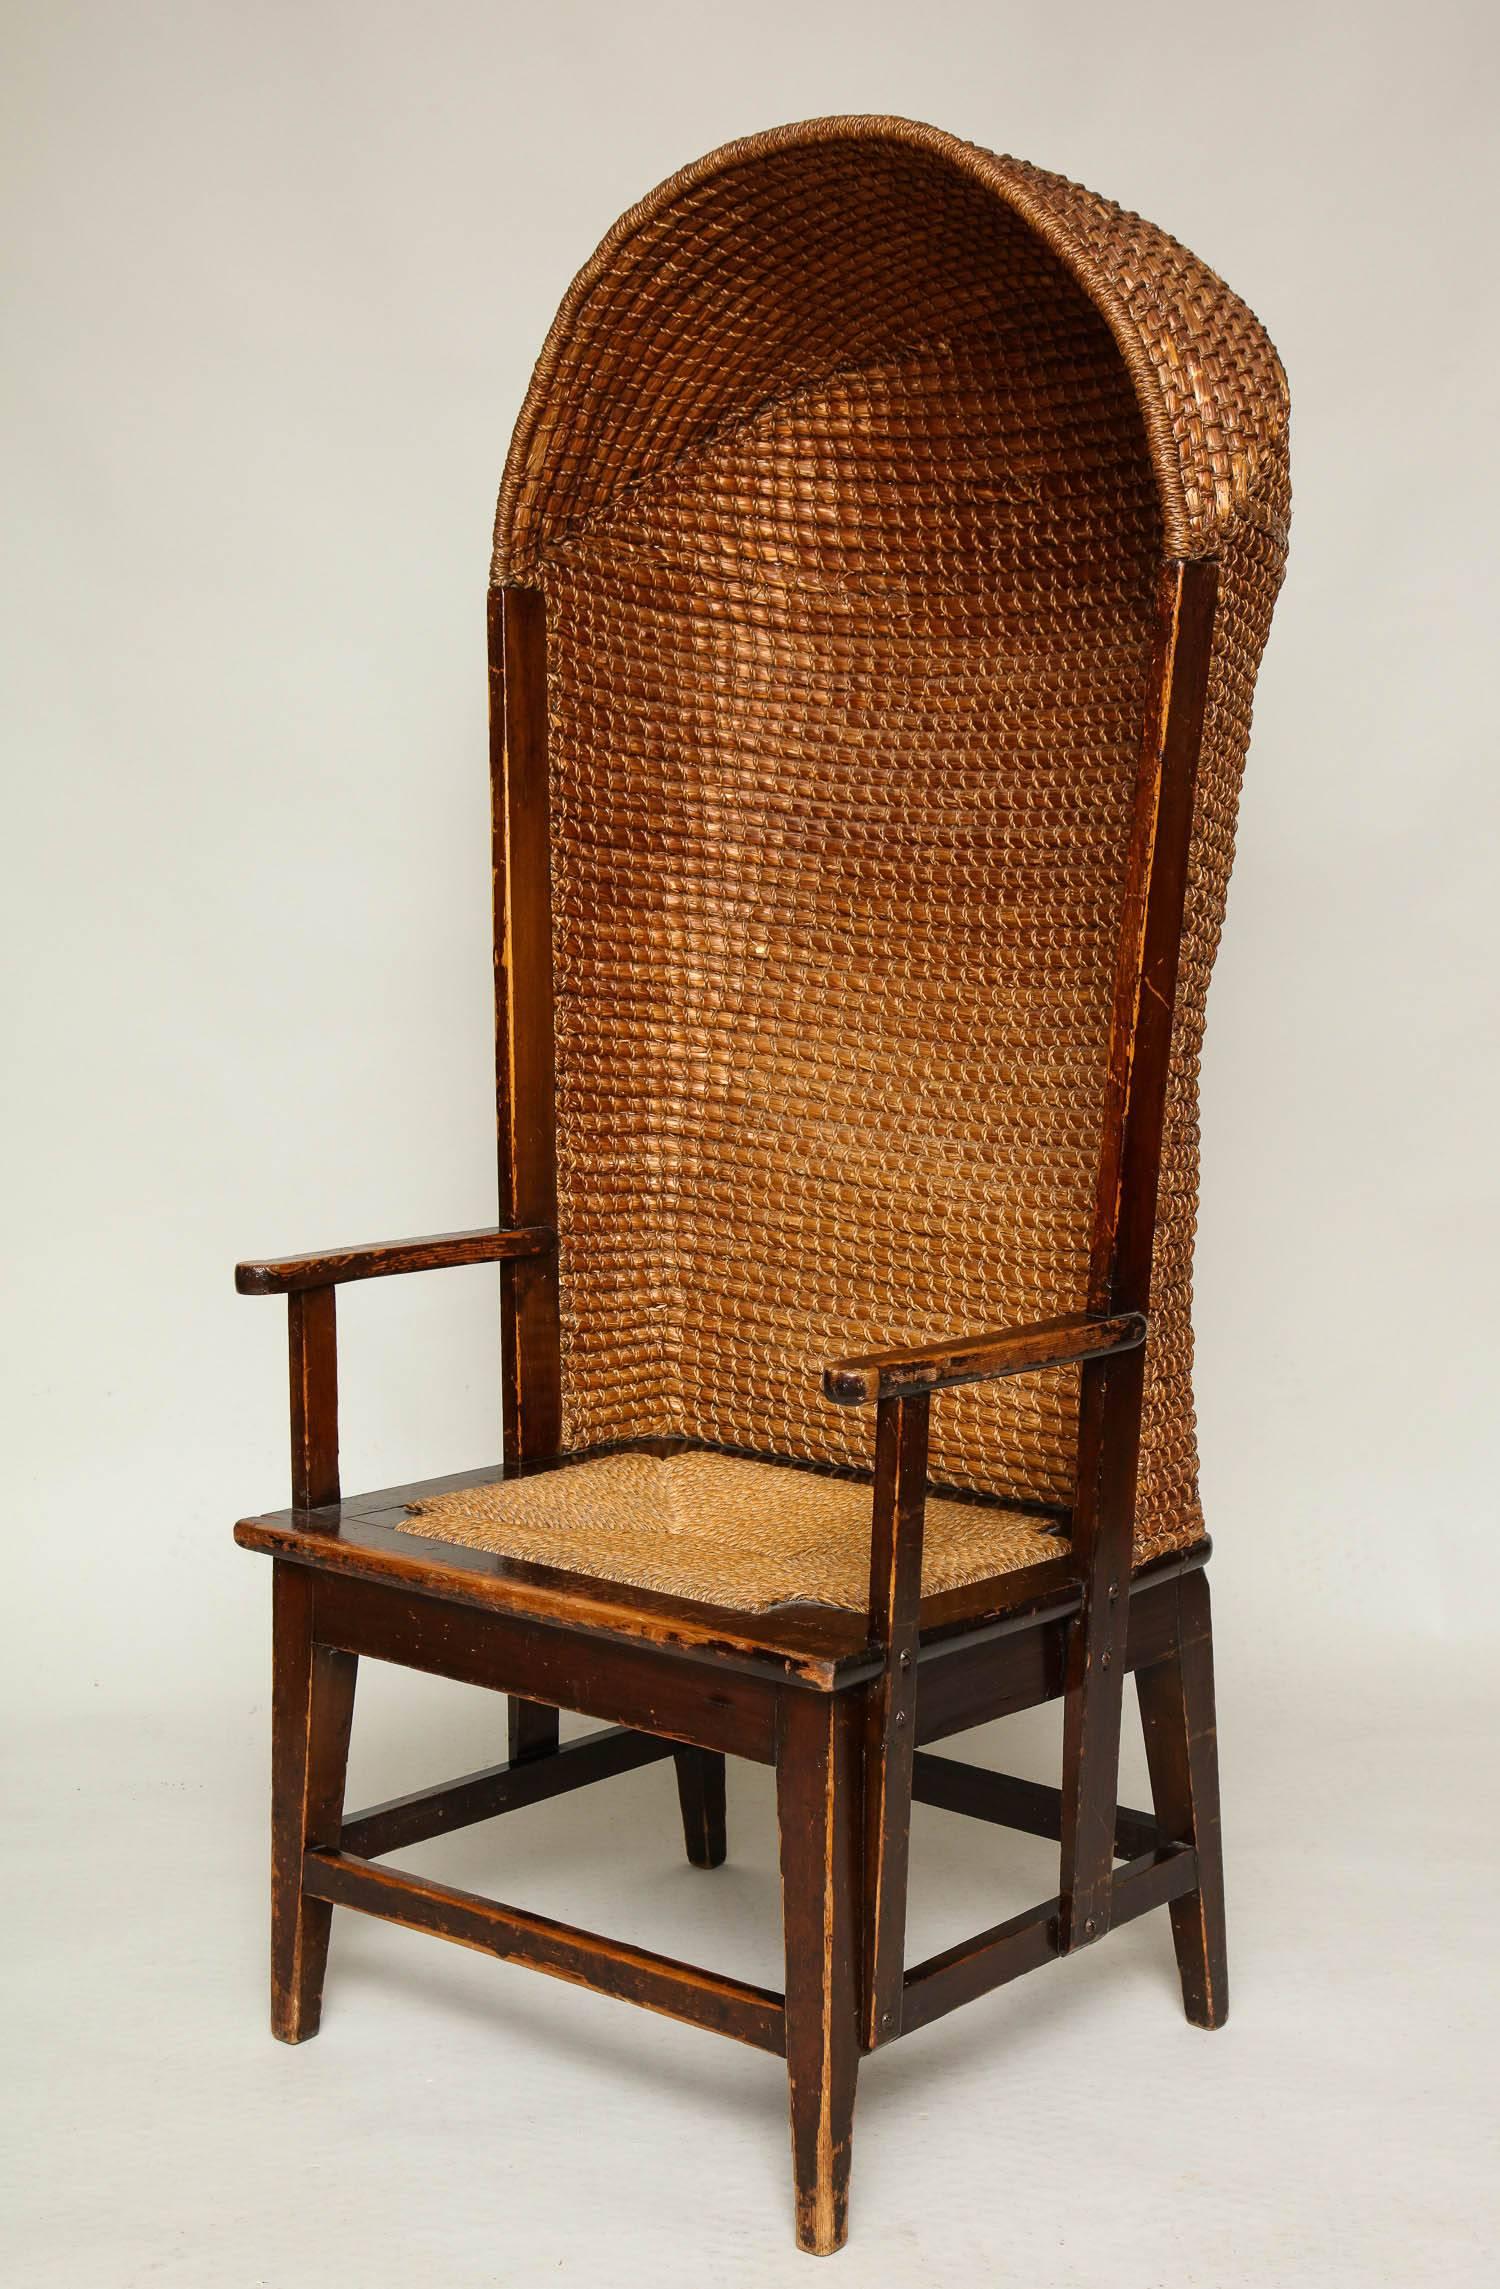 Very fine and unusual 19th century Scottish woven rush and wood chair from the Orkney Islands, this example is remarkable for its age, condition and the uncommon hooded back reminiscent of a Georgian porter's chair and probably conceived for the